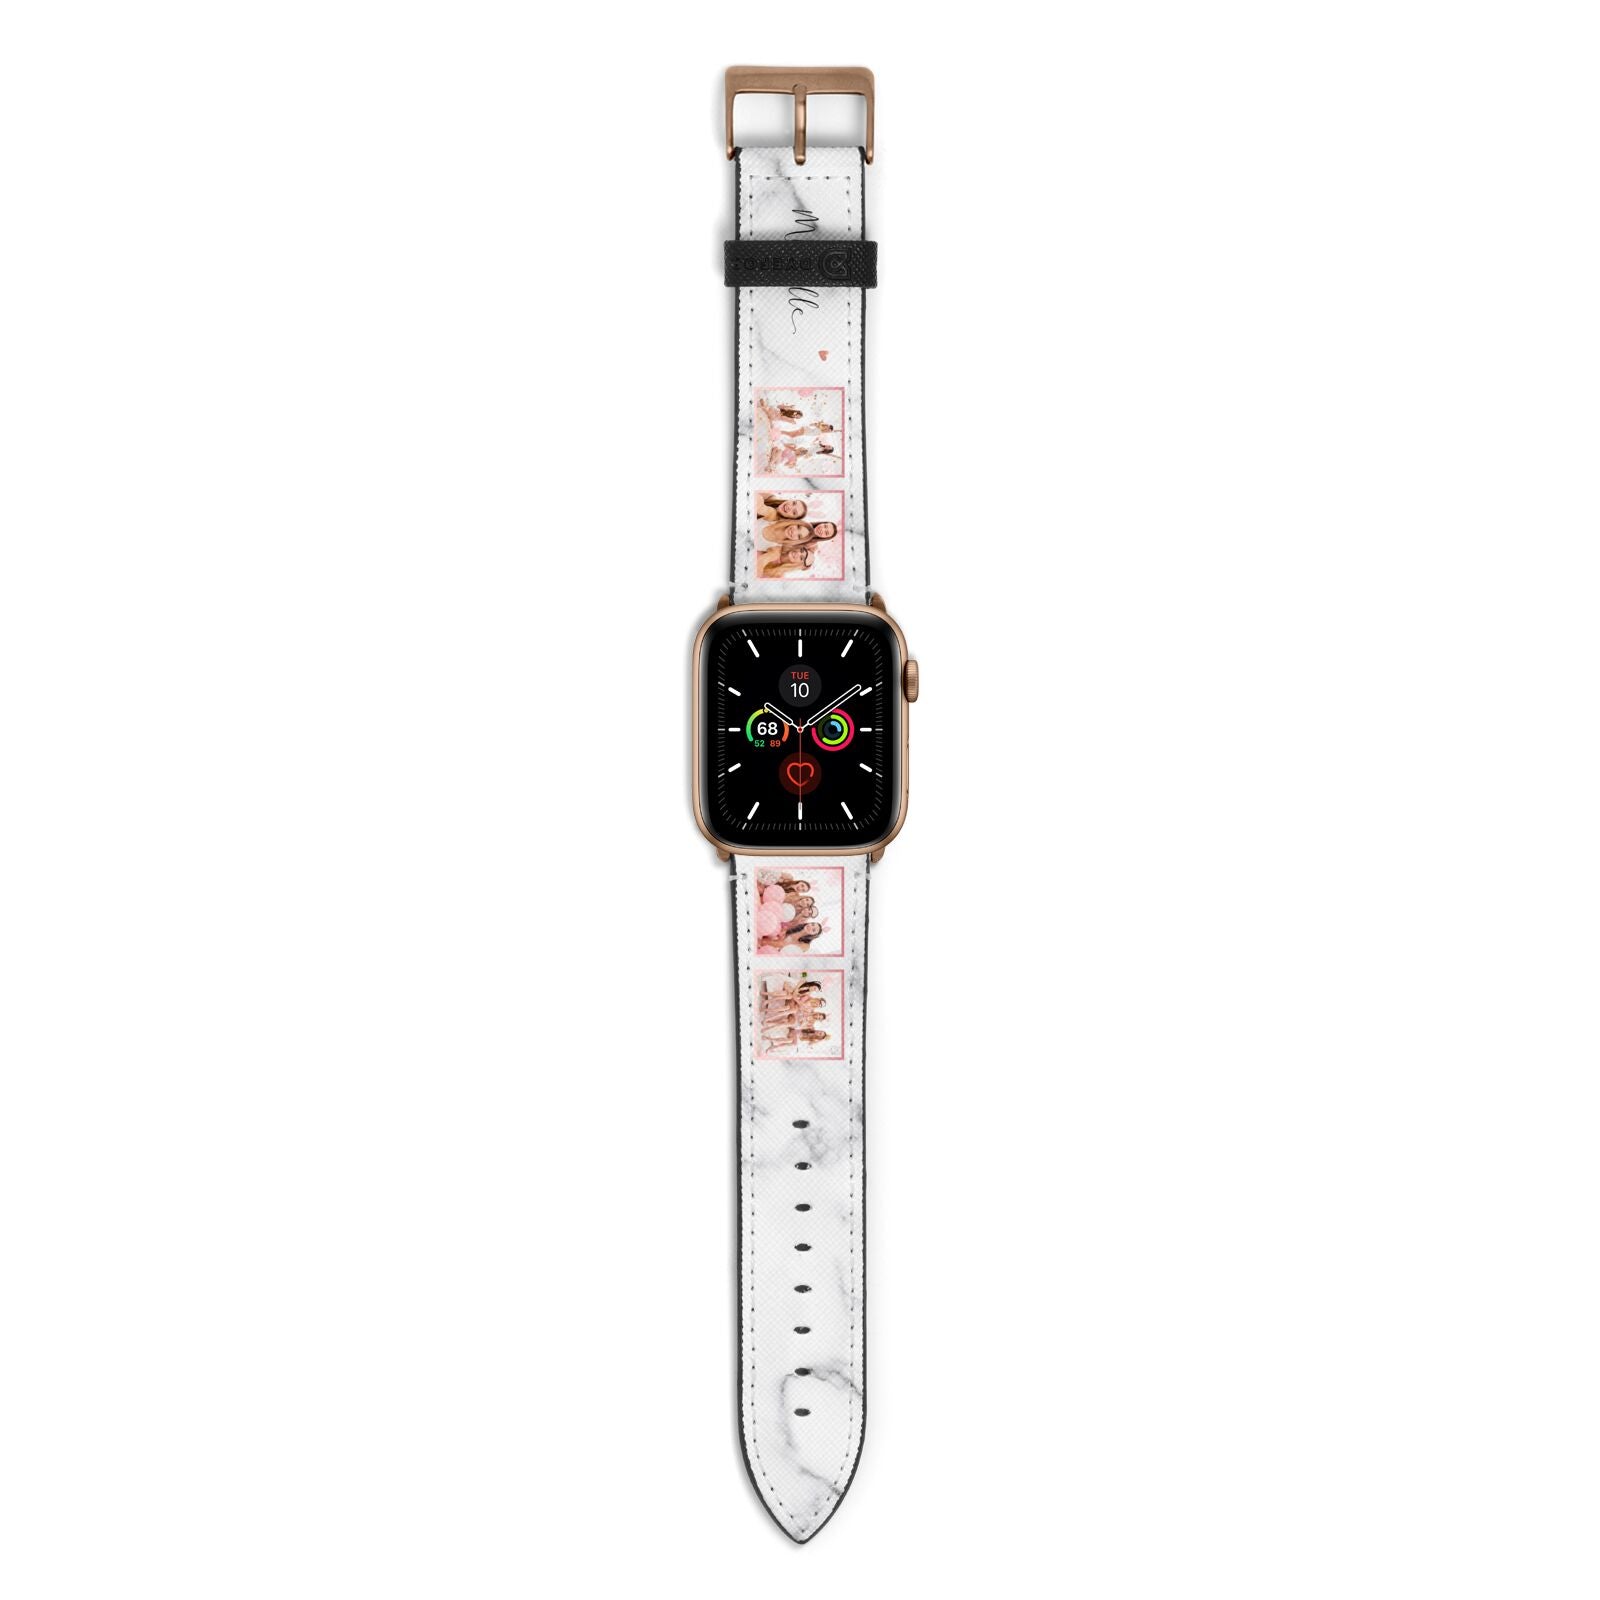 Marble Photo Strip Personalised Apple Watch Strap with Gold Hardware